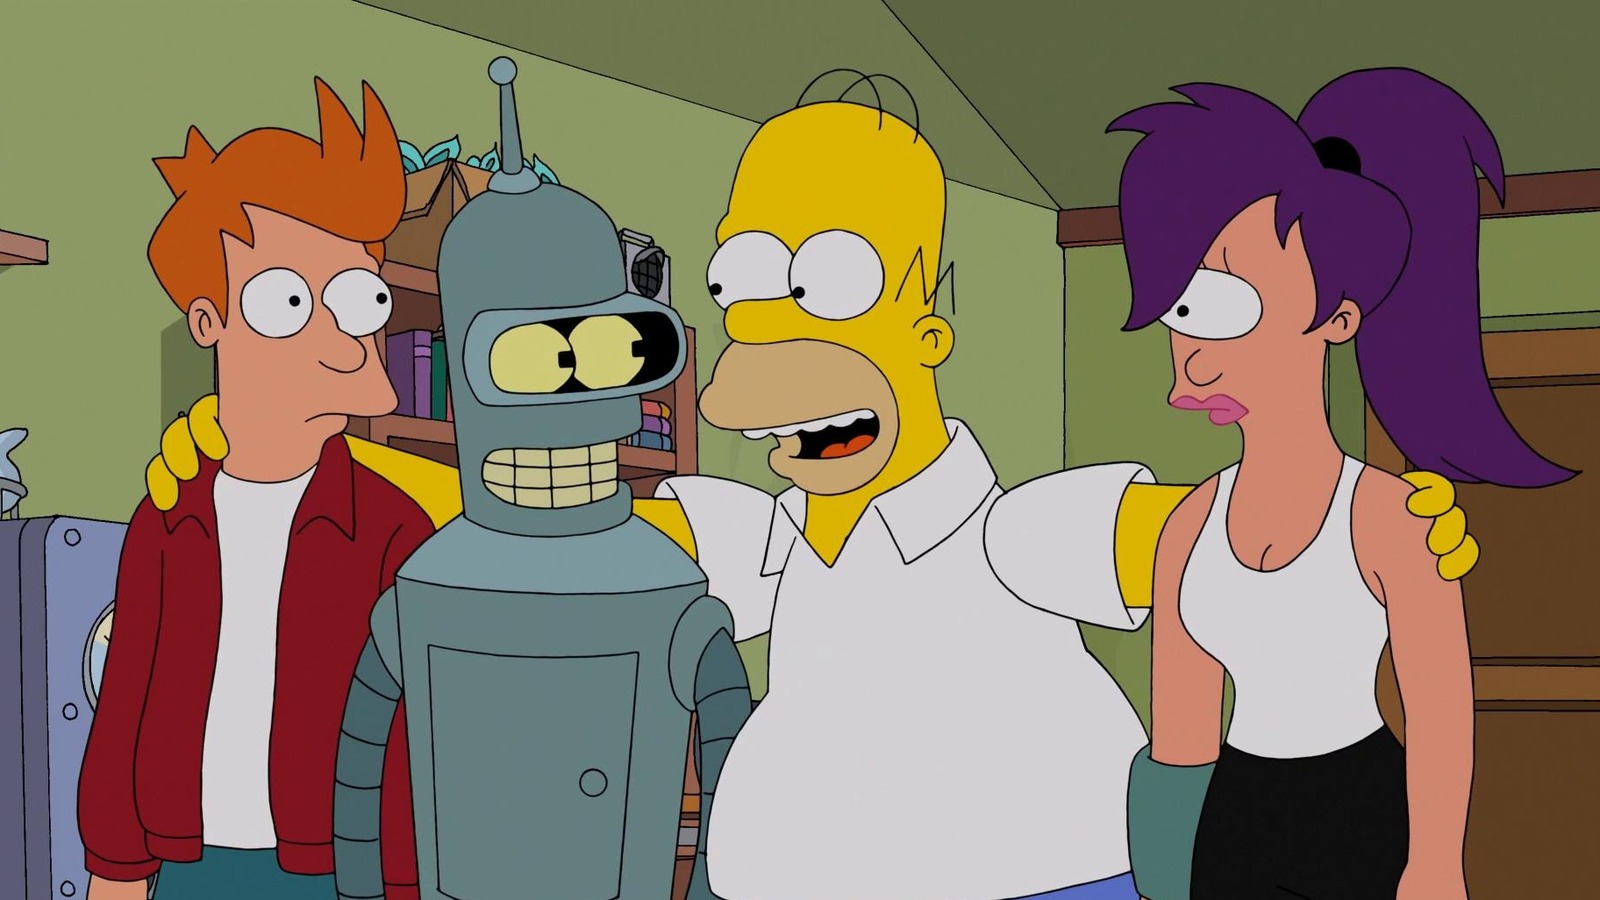 #The Simpsons’ Futurama Crossover Came With Some Serious Baggage